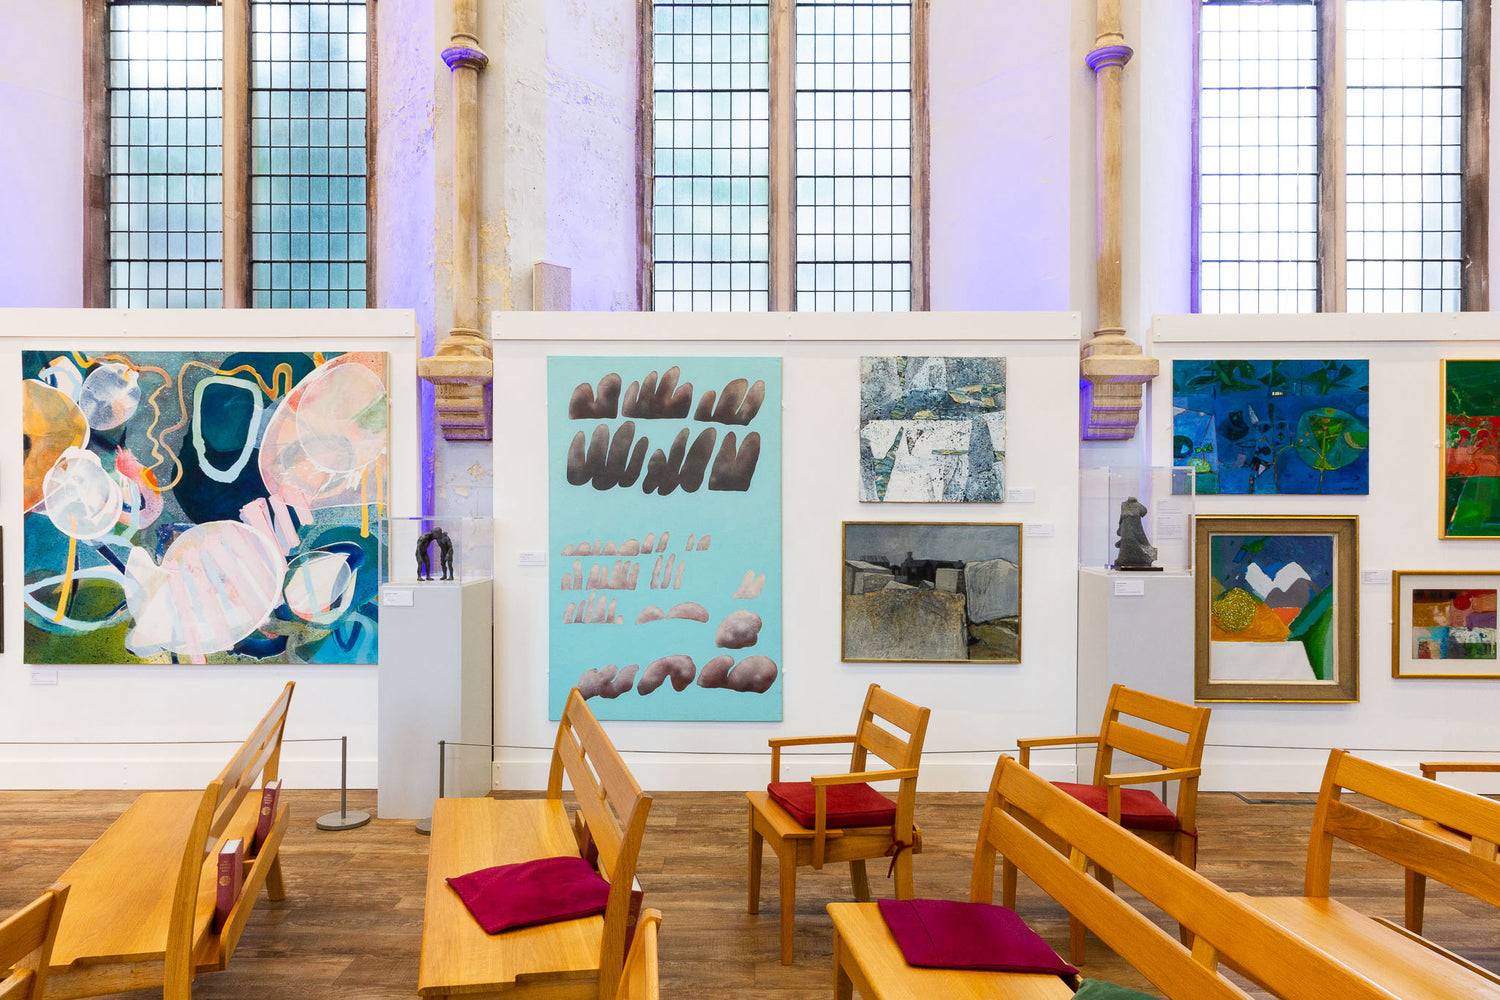 The RWA Collection - Our Heritage, Our Future, installation view, Victoria Methodist Church, 2021. Photo: Lisa Whiting Photography